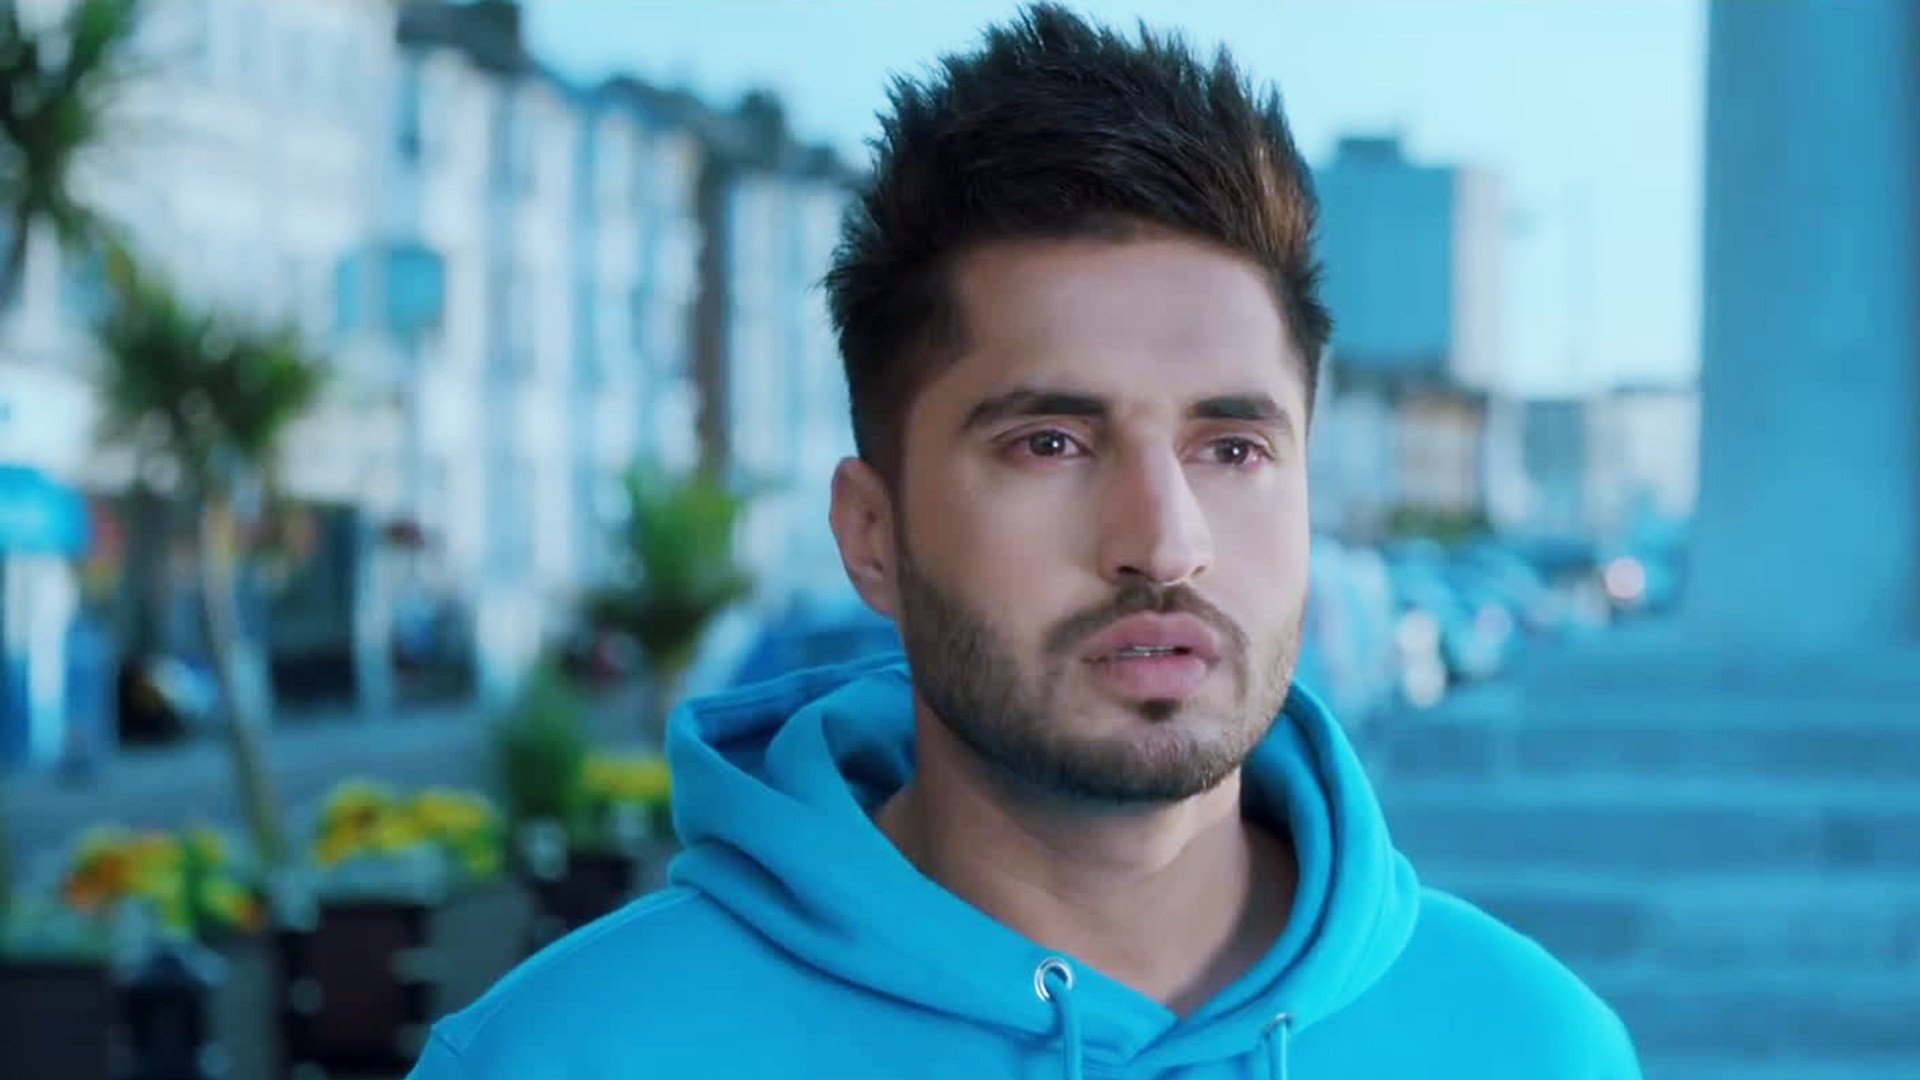 Jassi Gill 2019 Hairstyle Wallpaper - Jassi Gill New Hairstyle 2019 -  1920x1080 Wallpaper 